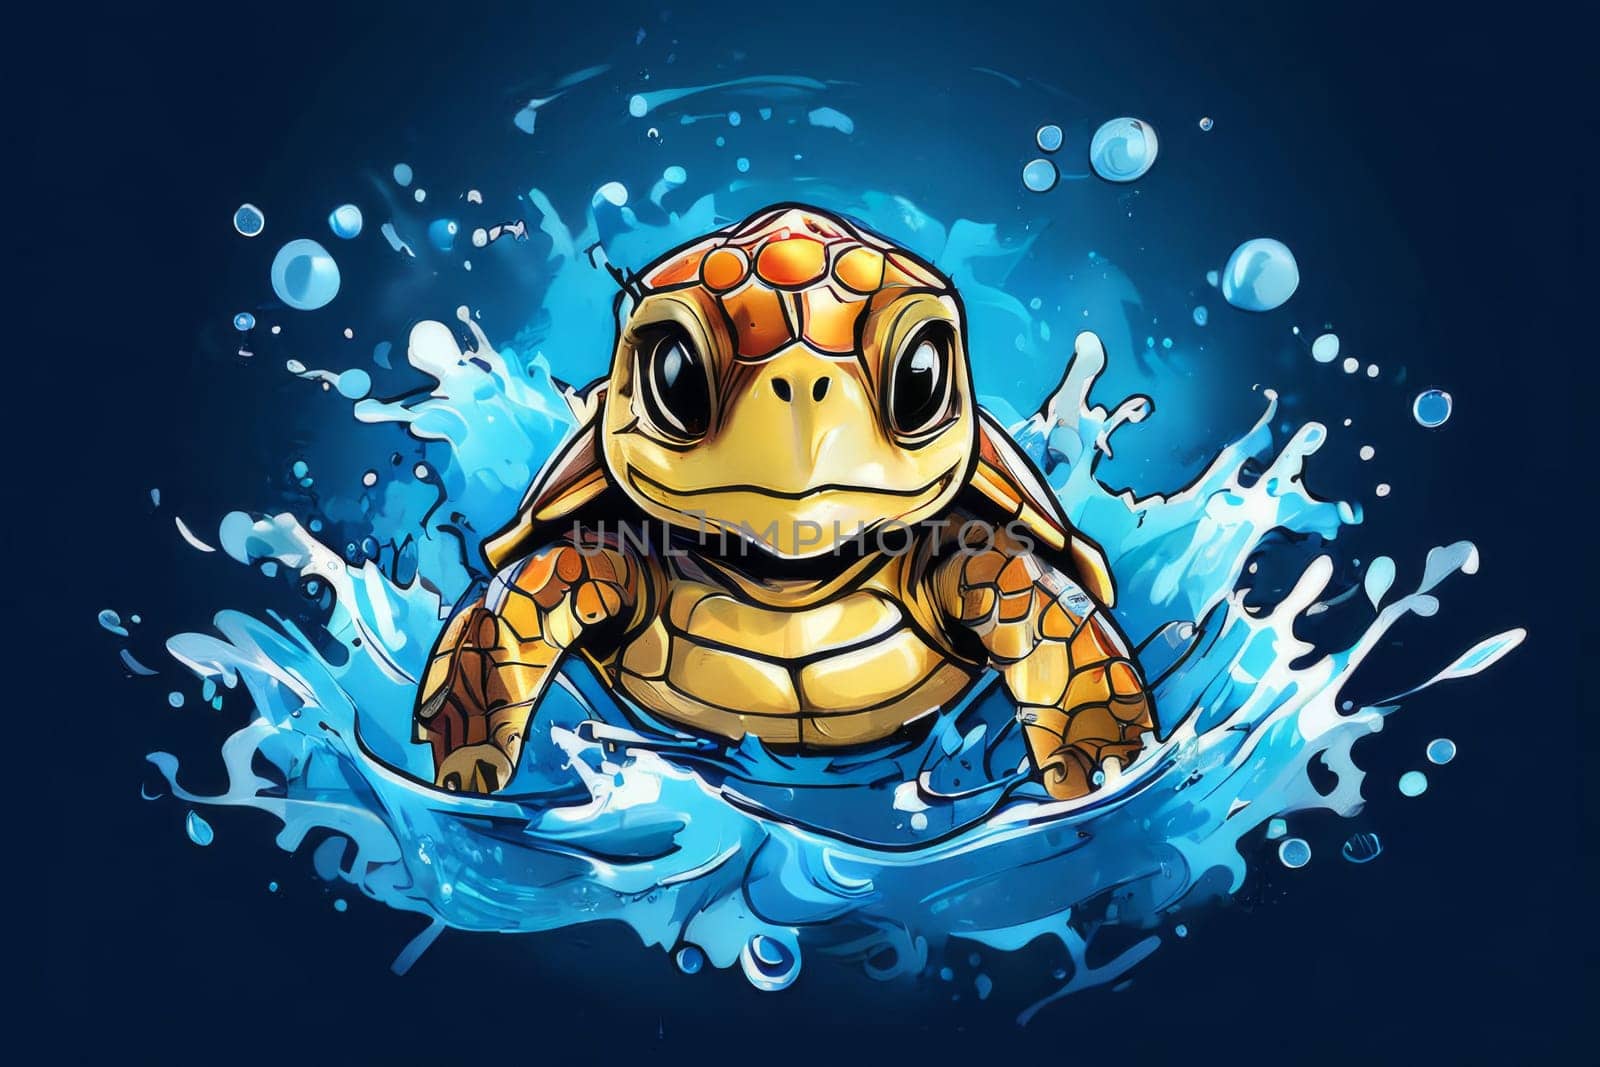 Turtle glides through its aquatic environment, showcasing beauty, tranquility of underwater world. For Tshirt design, posters, postcards, other merchandise with marine theme, childrens books, tourism